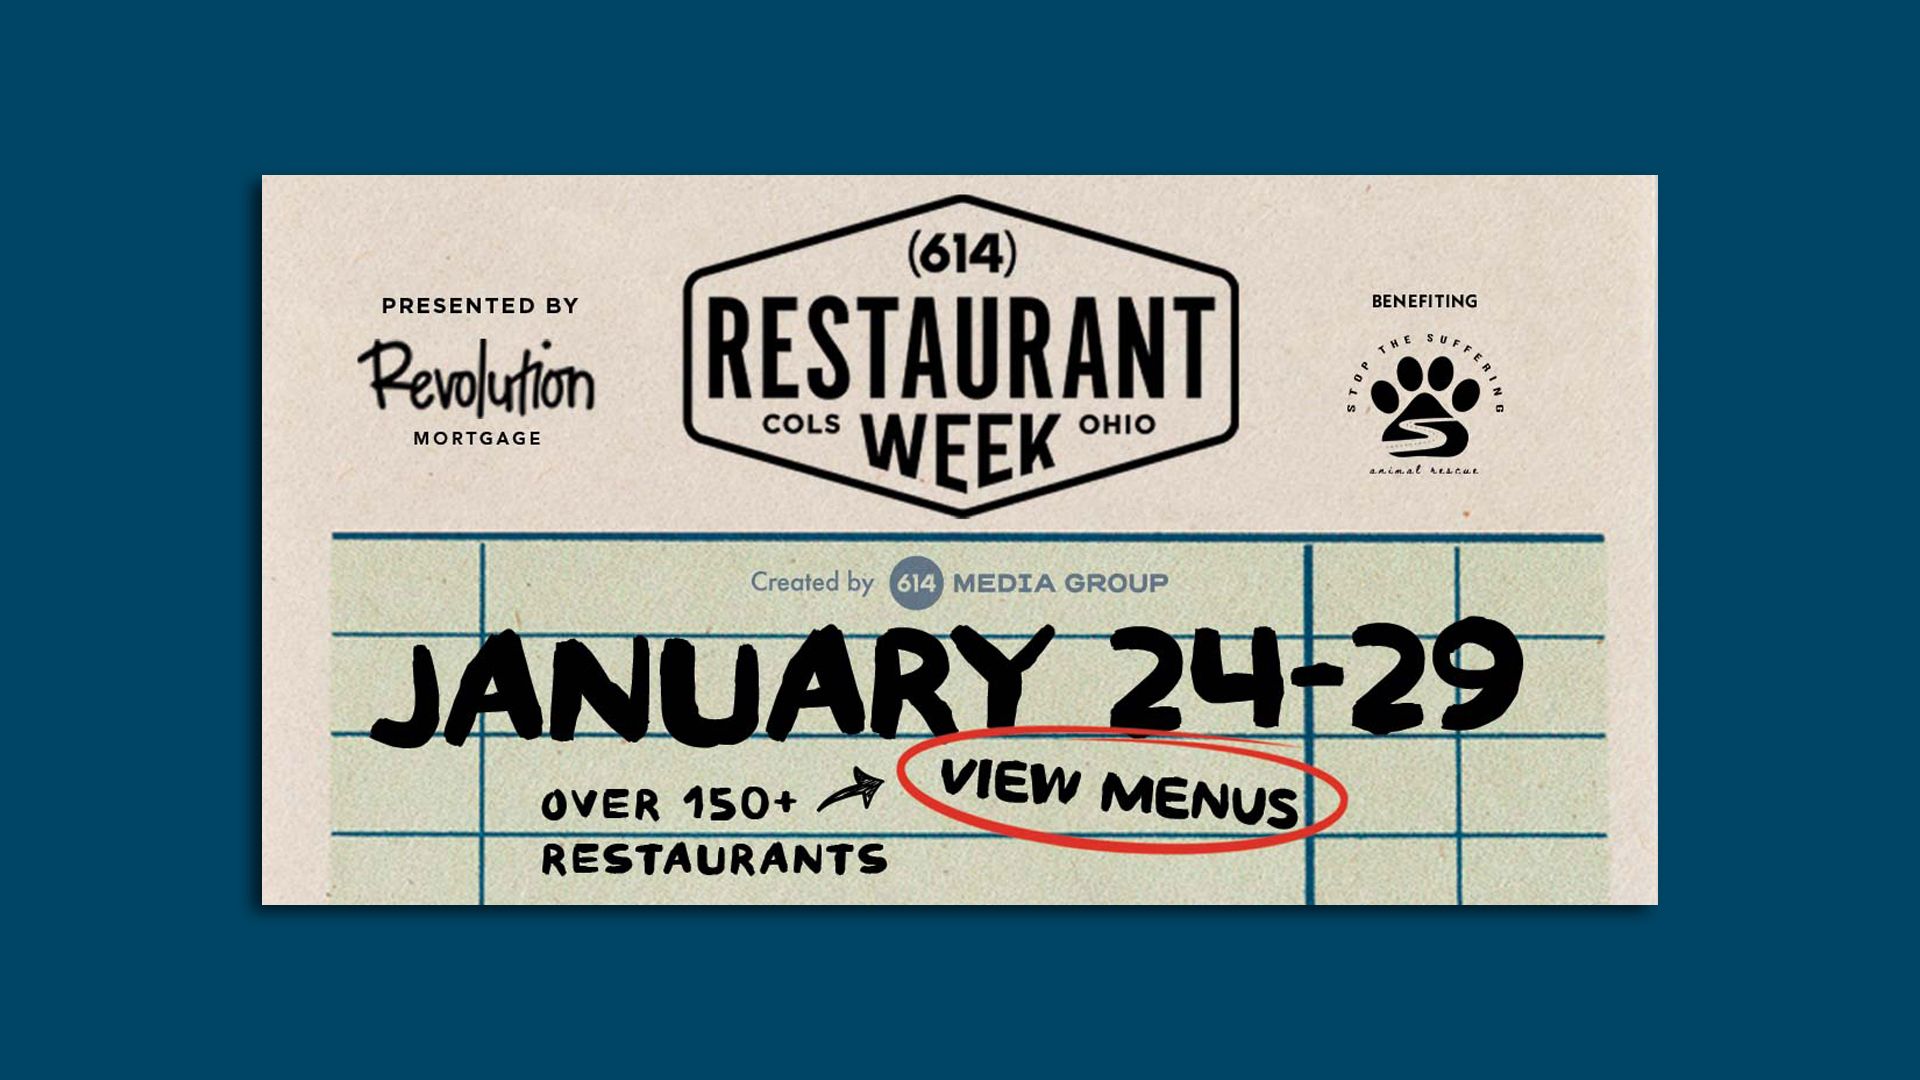 A logo for 614 Restaurant Week featuring the January 24-29 date, sponsors and a menu teaser